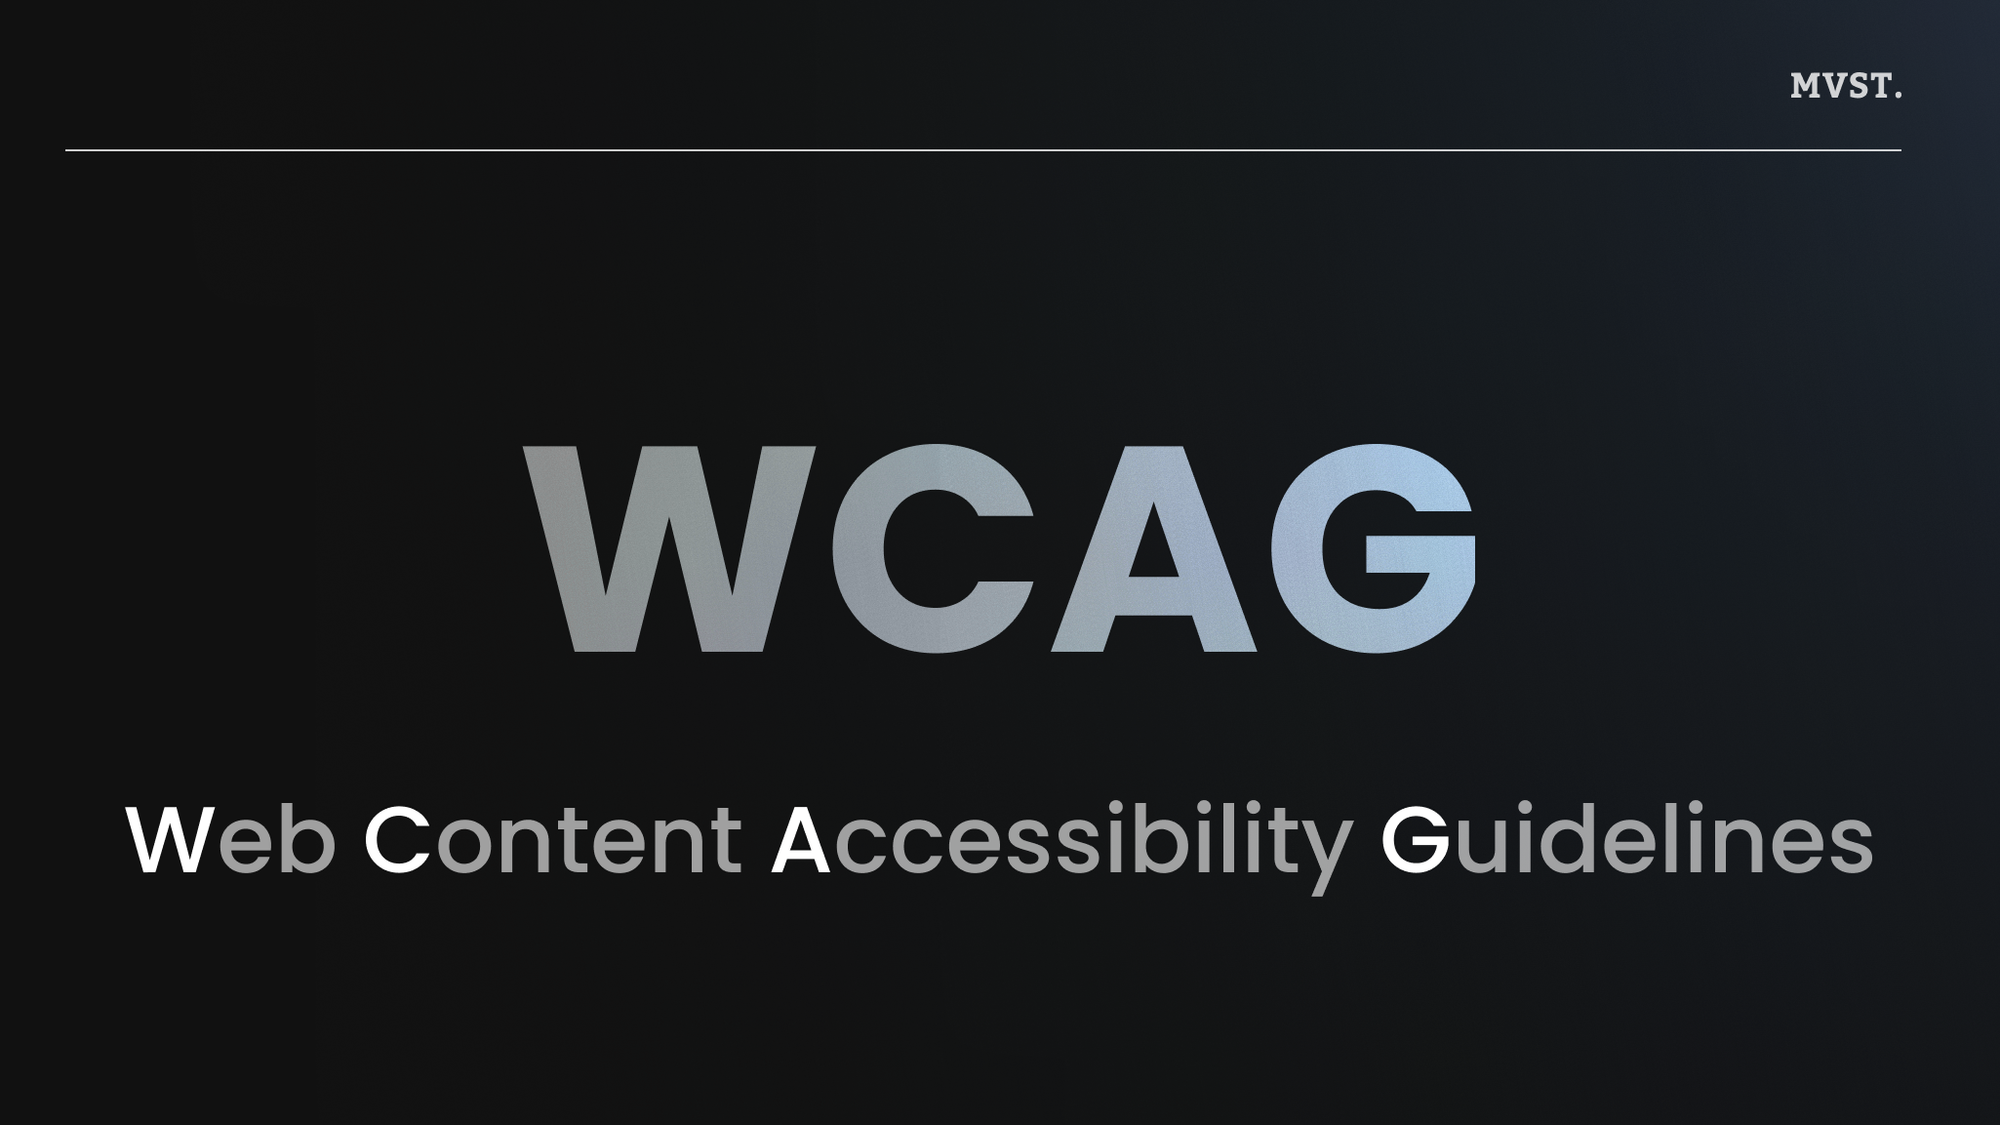 What is Accessibility and WCAG?